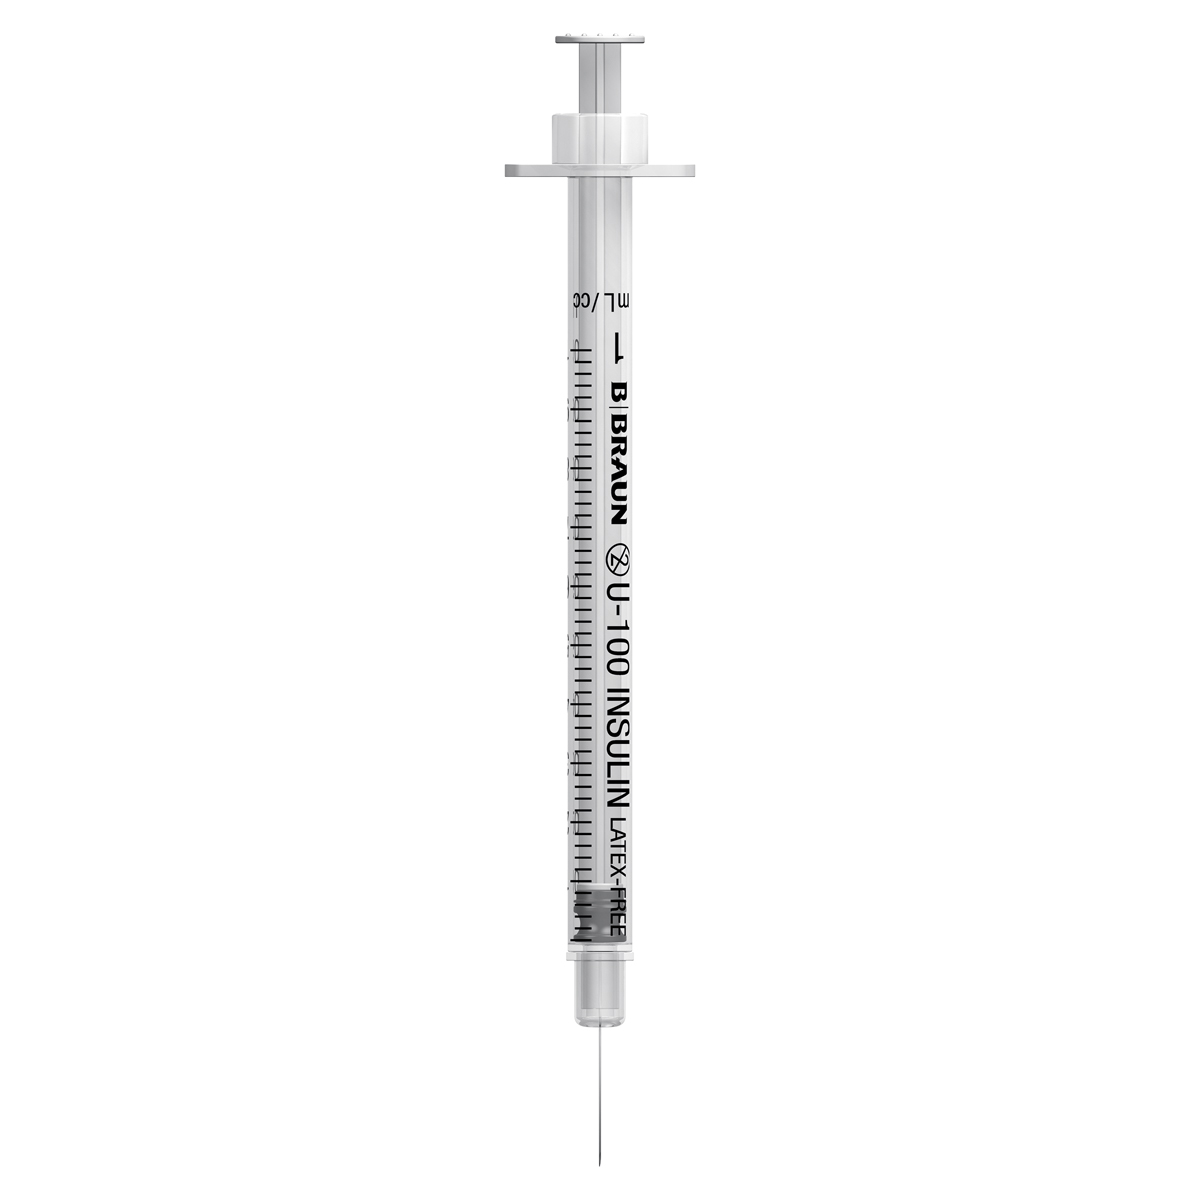 BBraun Omnican 1ml 30G insulin syringe (ind blister packed). 